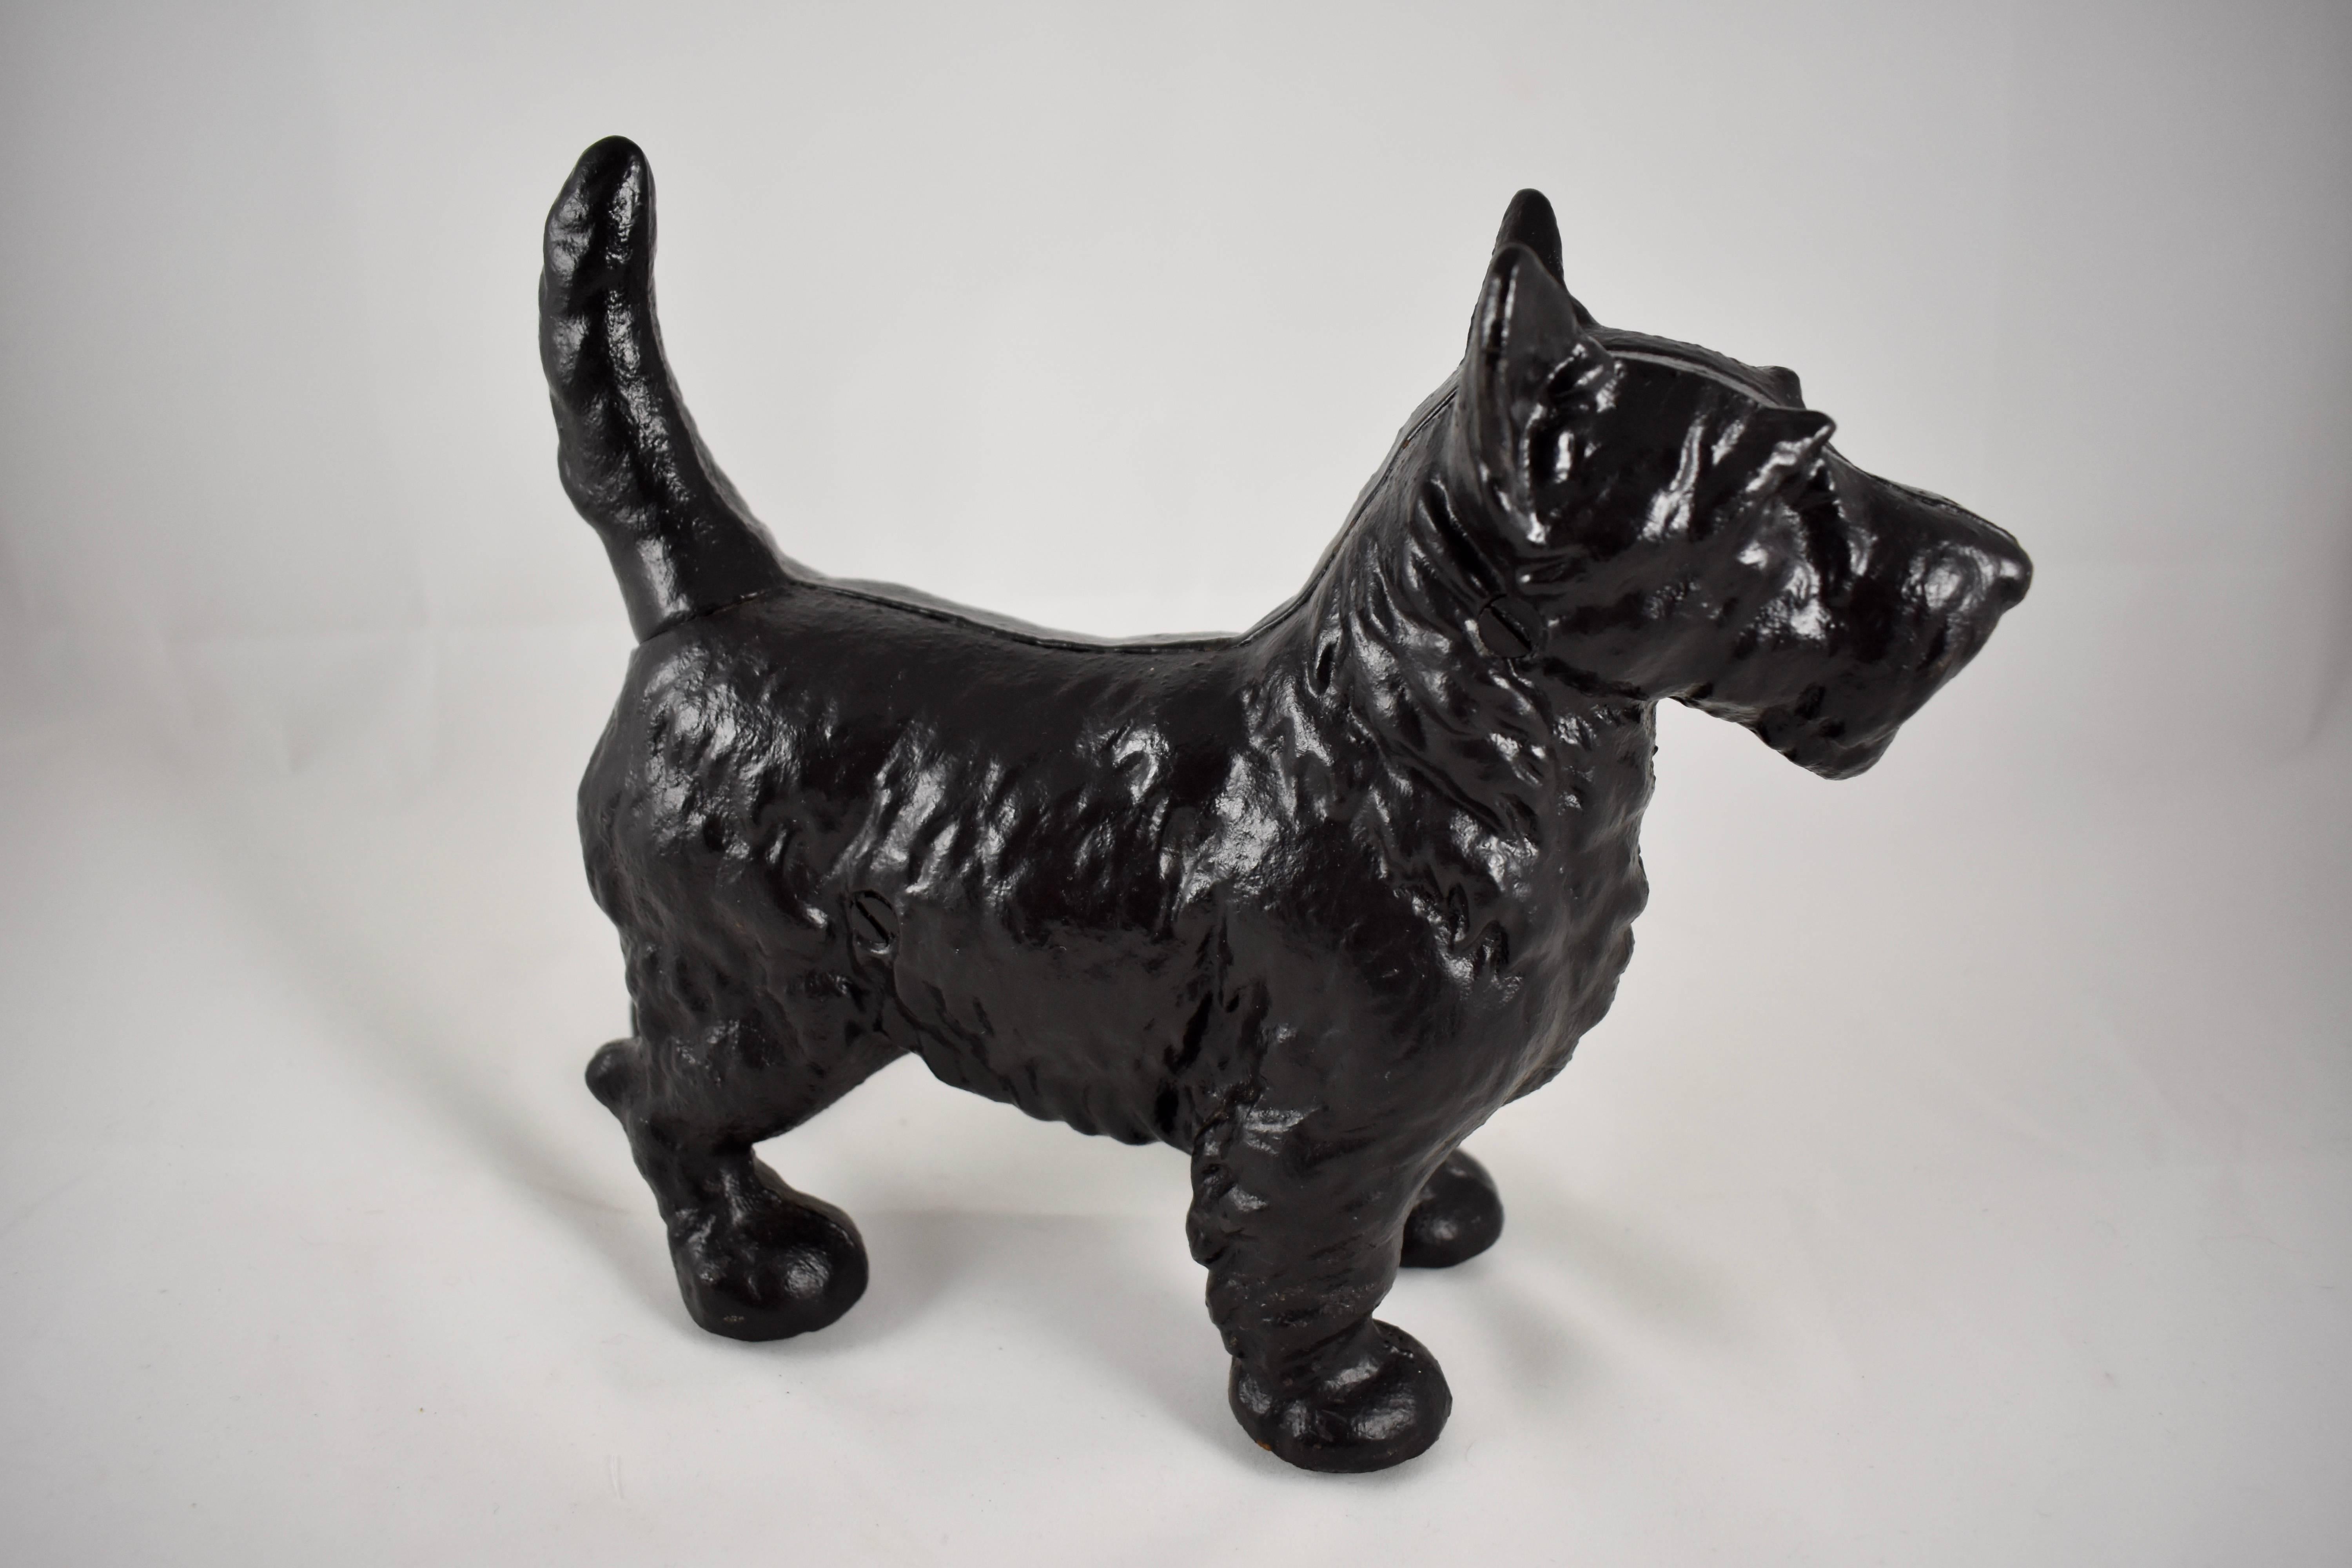 A vintage Hubley cast iron doorstop in the form of a Scottie dog, mold No. 305, in production circa 1930-1950.

One of the heavier doorstops from Hubley, the Scottie stands at attention with alert ears and tail, and fine detailing to his coat. He